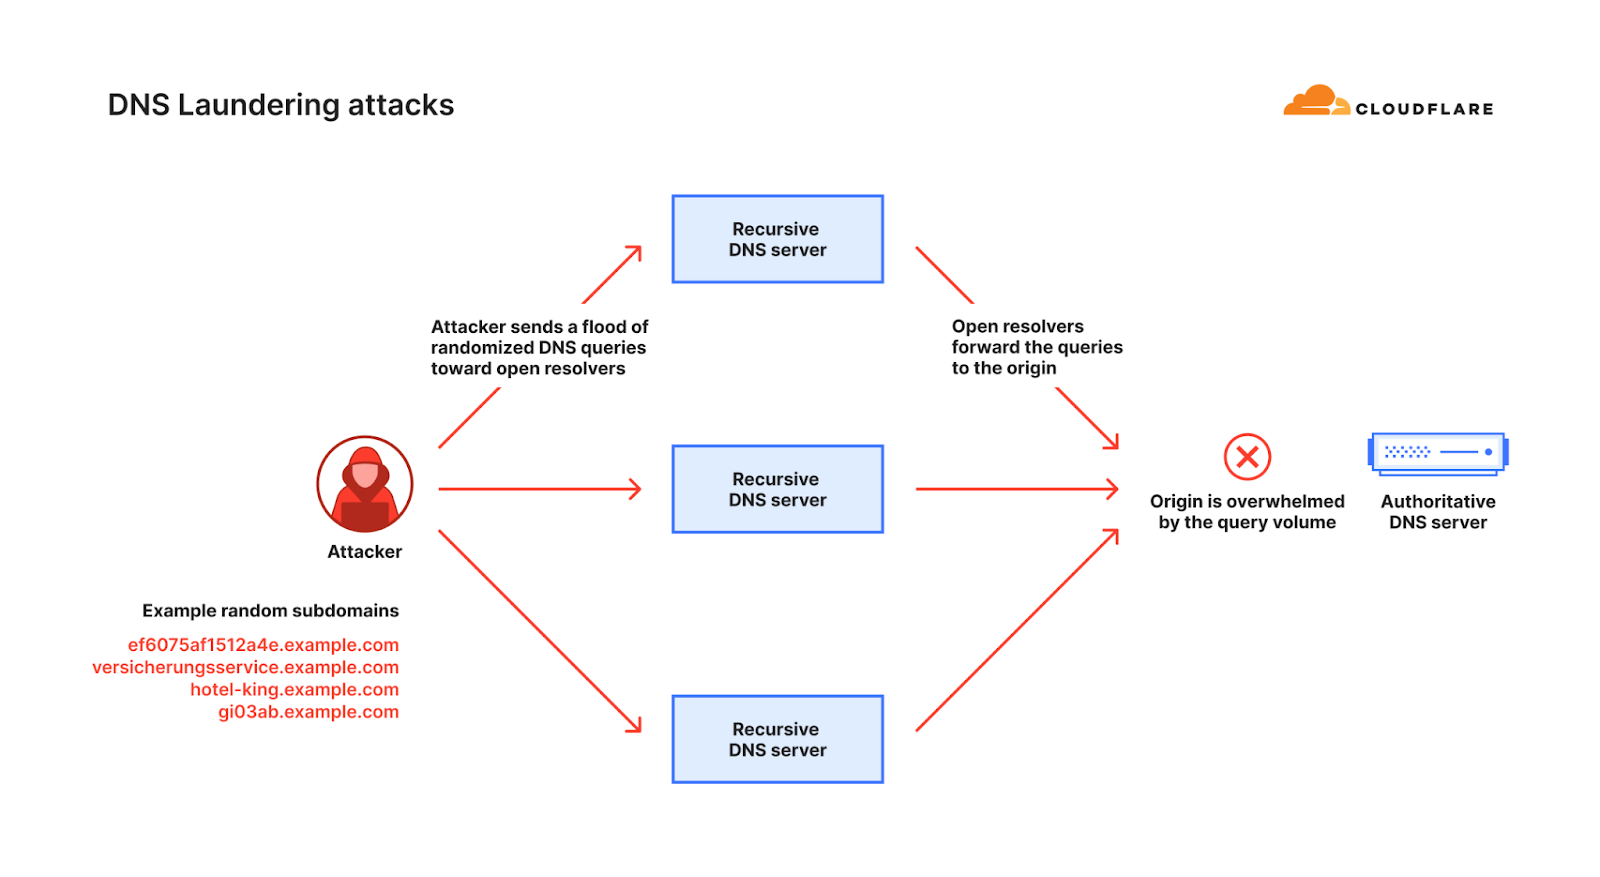 Diagram of a DNS Laundering attack